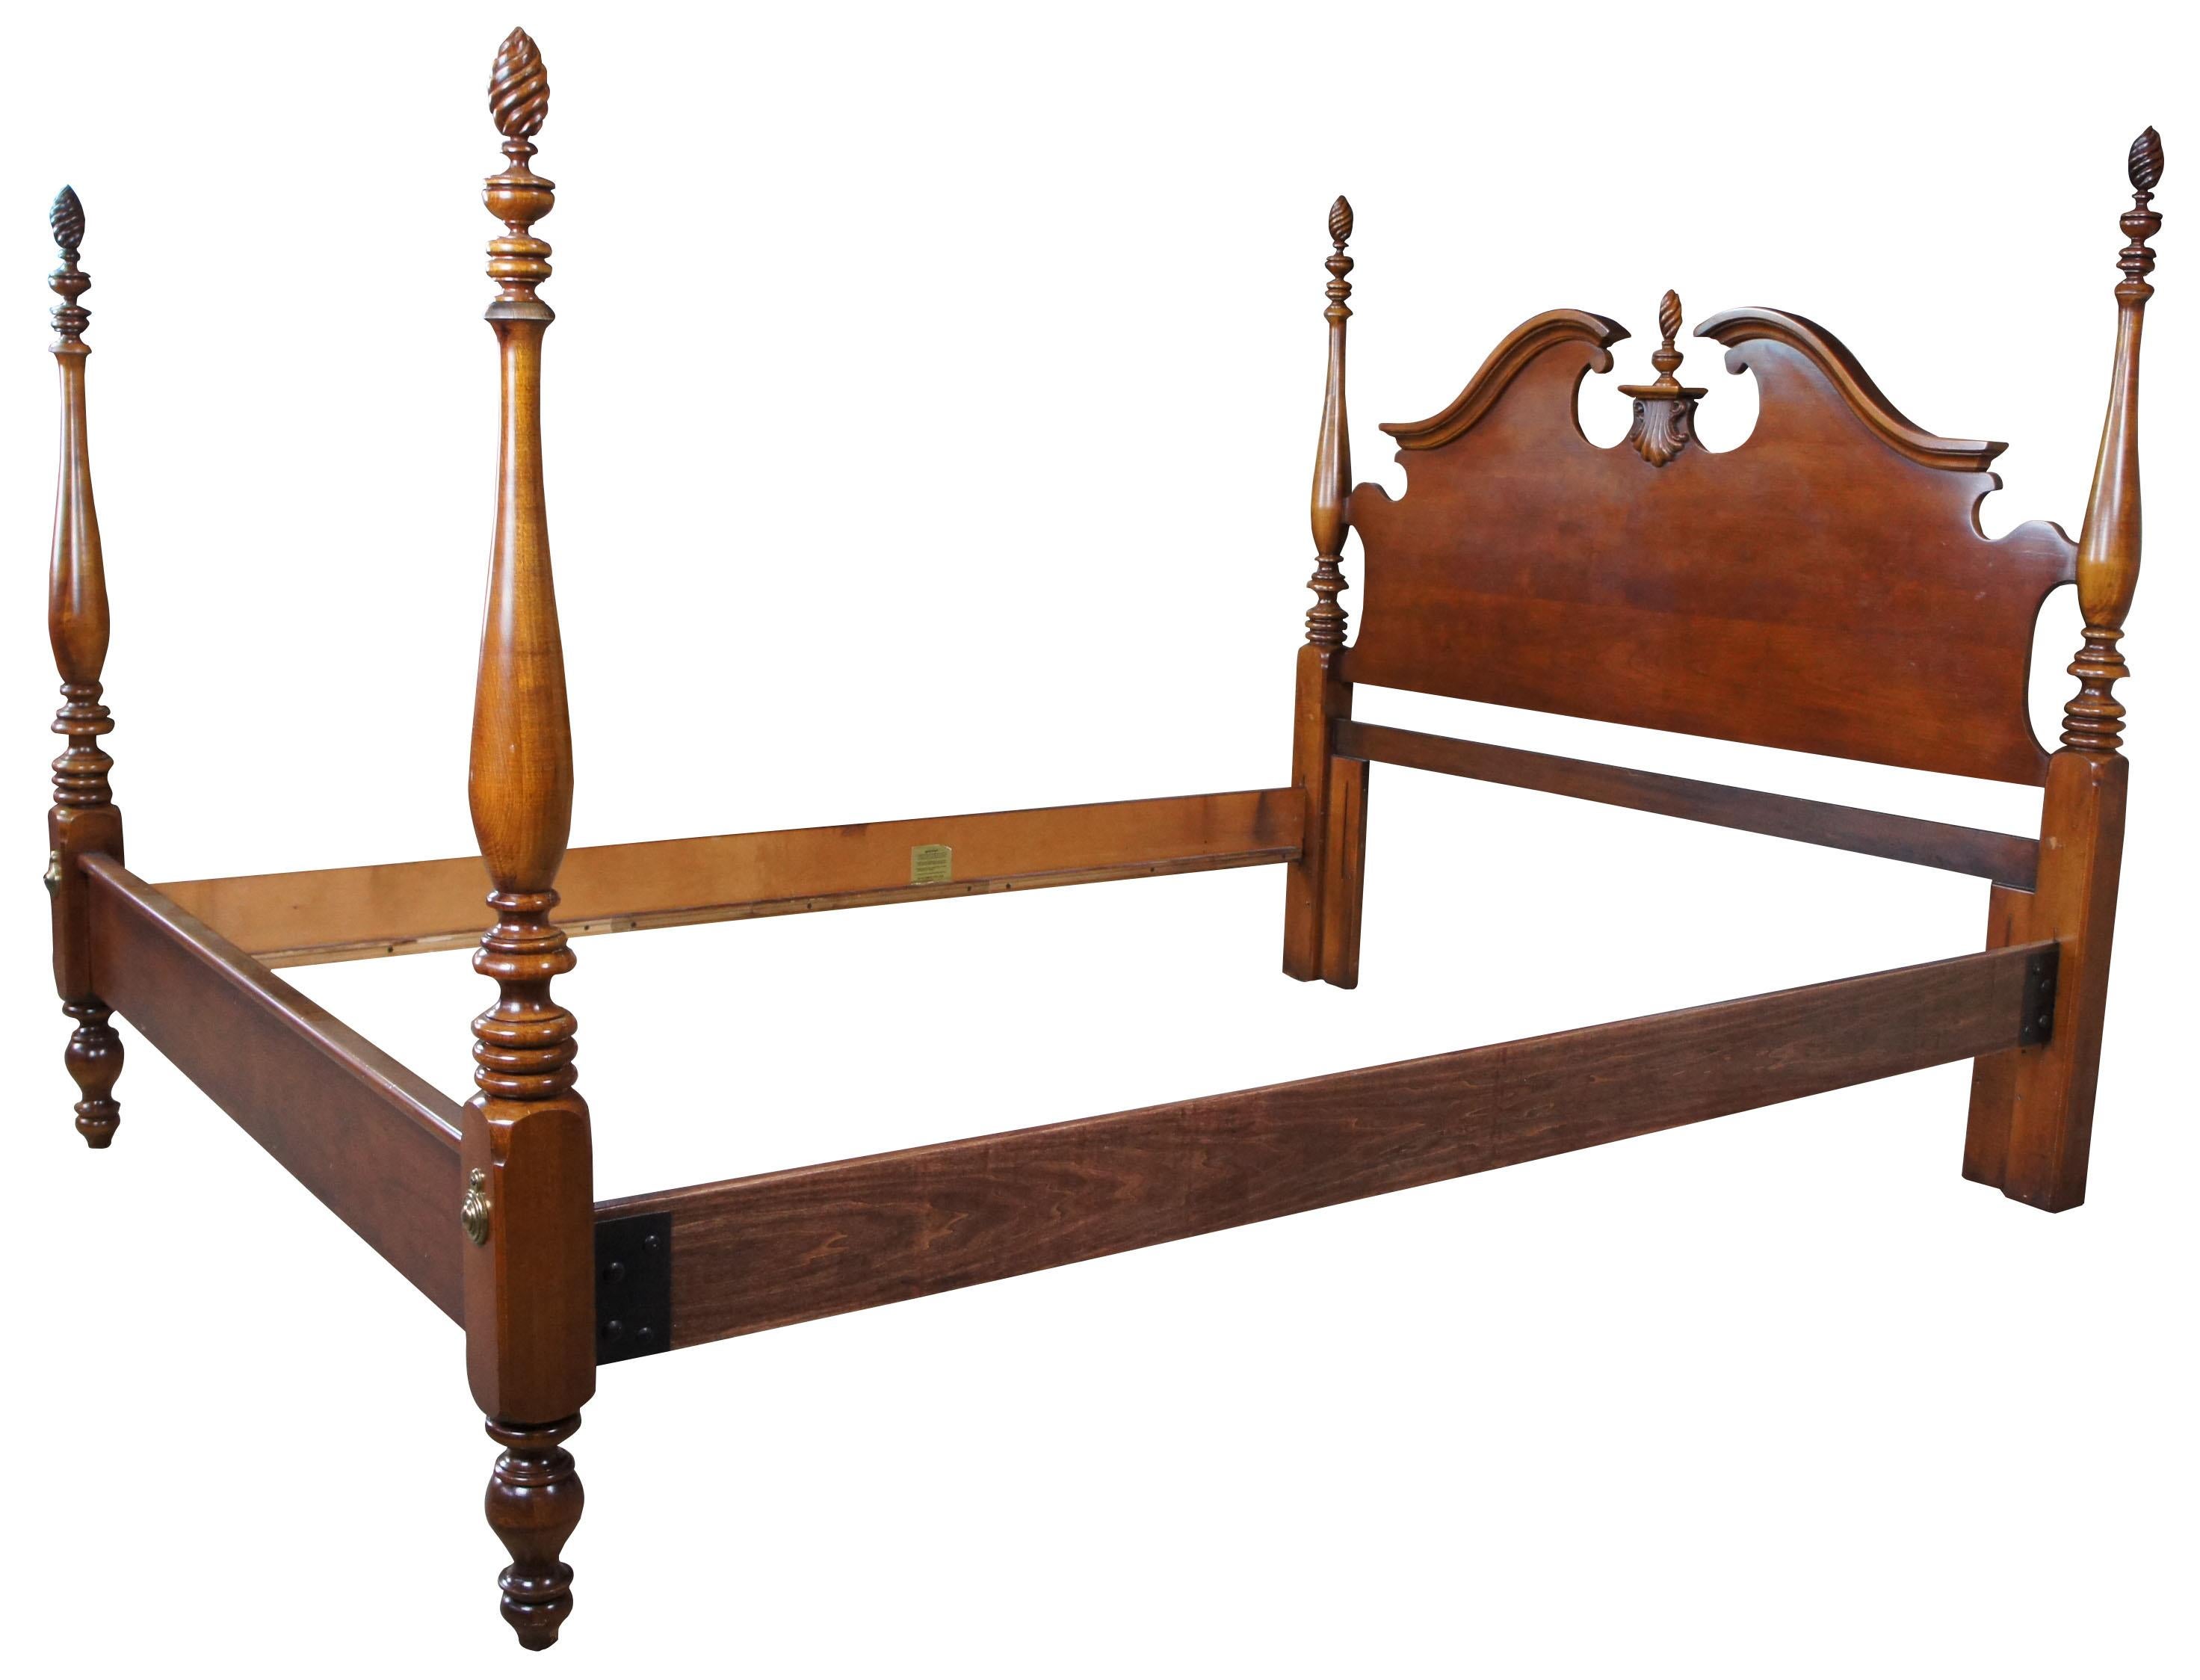 Vintage American Drew low post queen to full size bed. Made of solid cherry featuring serpentine form with open pediment, fluted and turned pine cone style finials and shell design.

490-1, 900521, USA